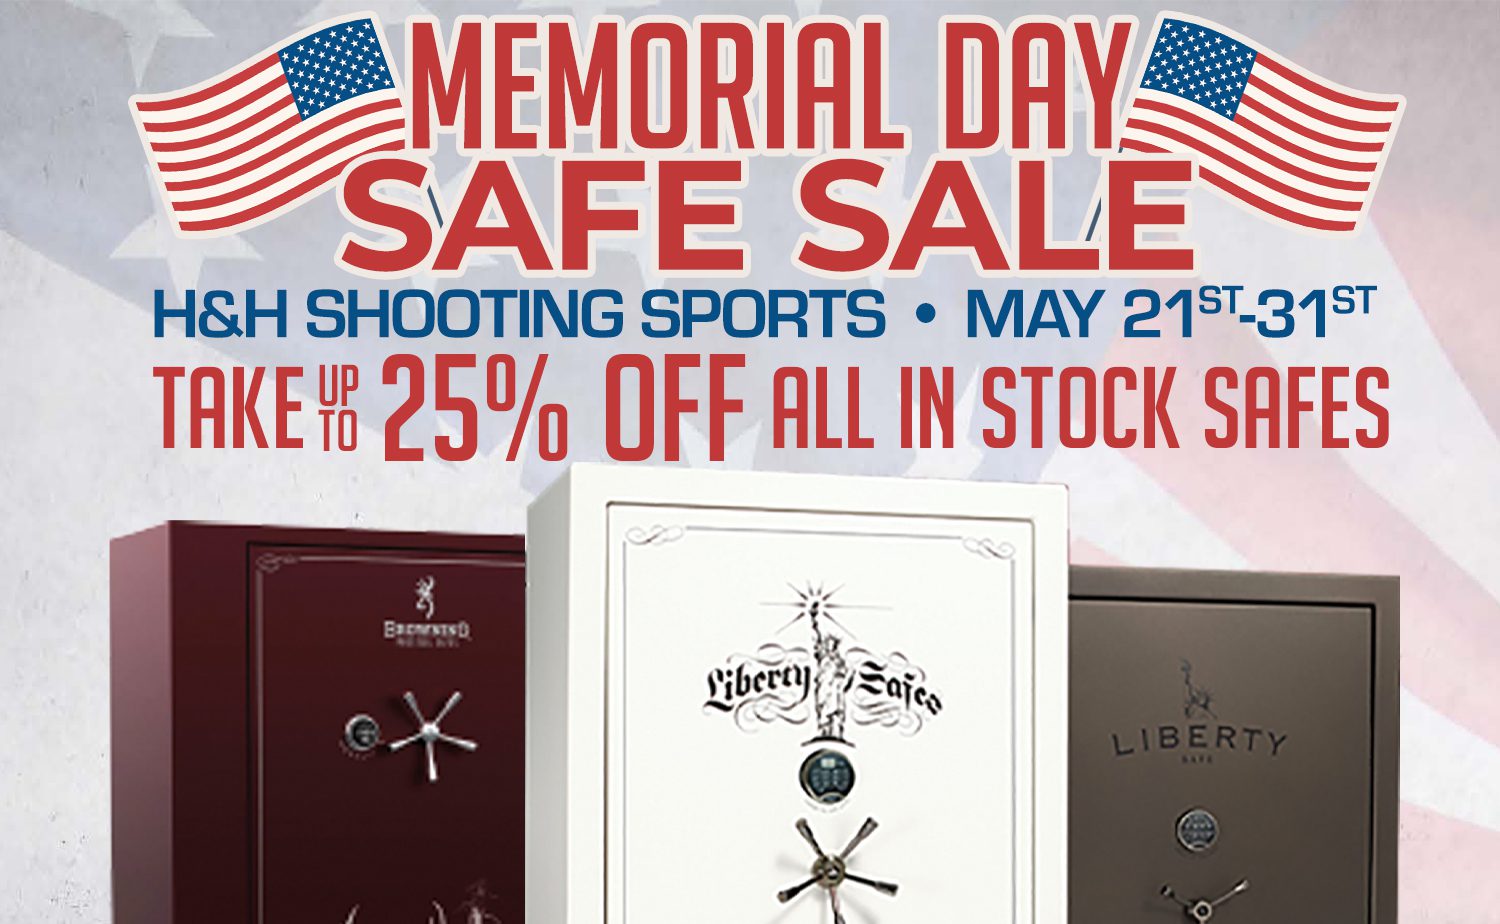 MEMORIAL DAY SAFE SALE MAY 2022